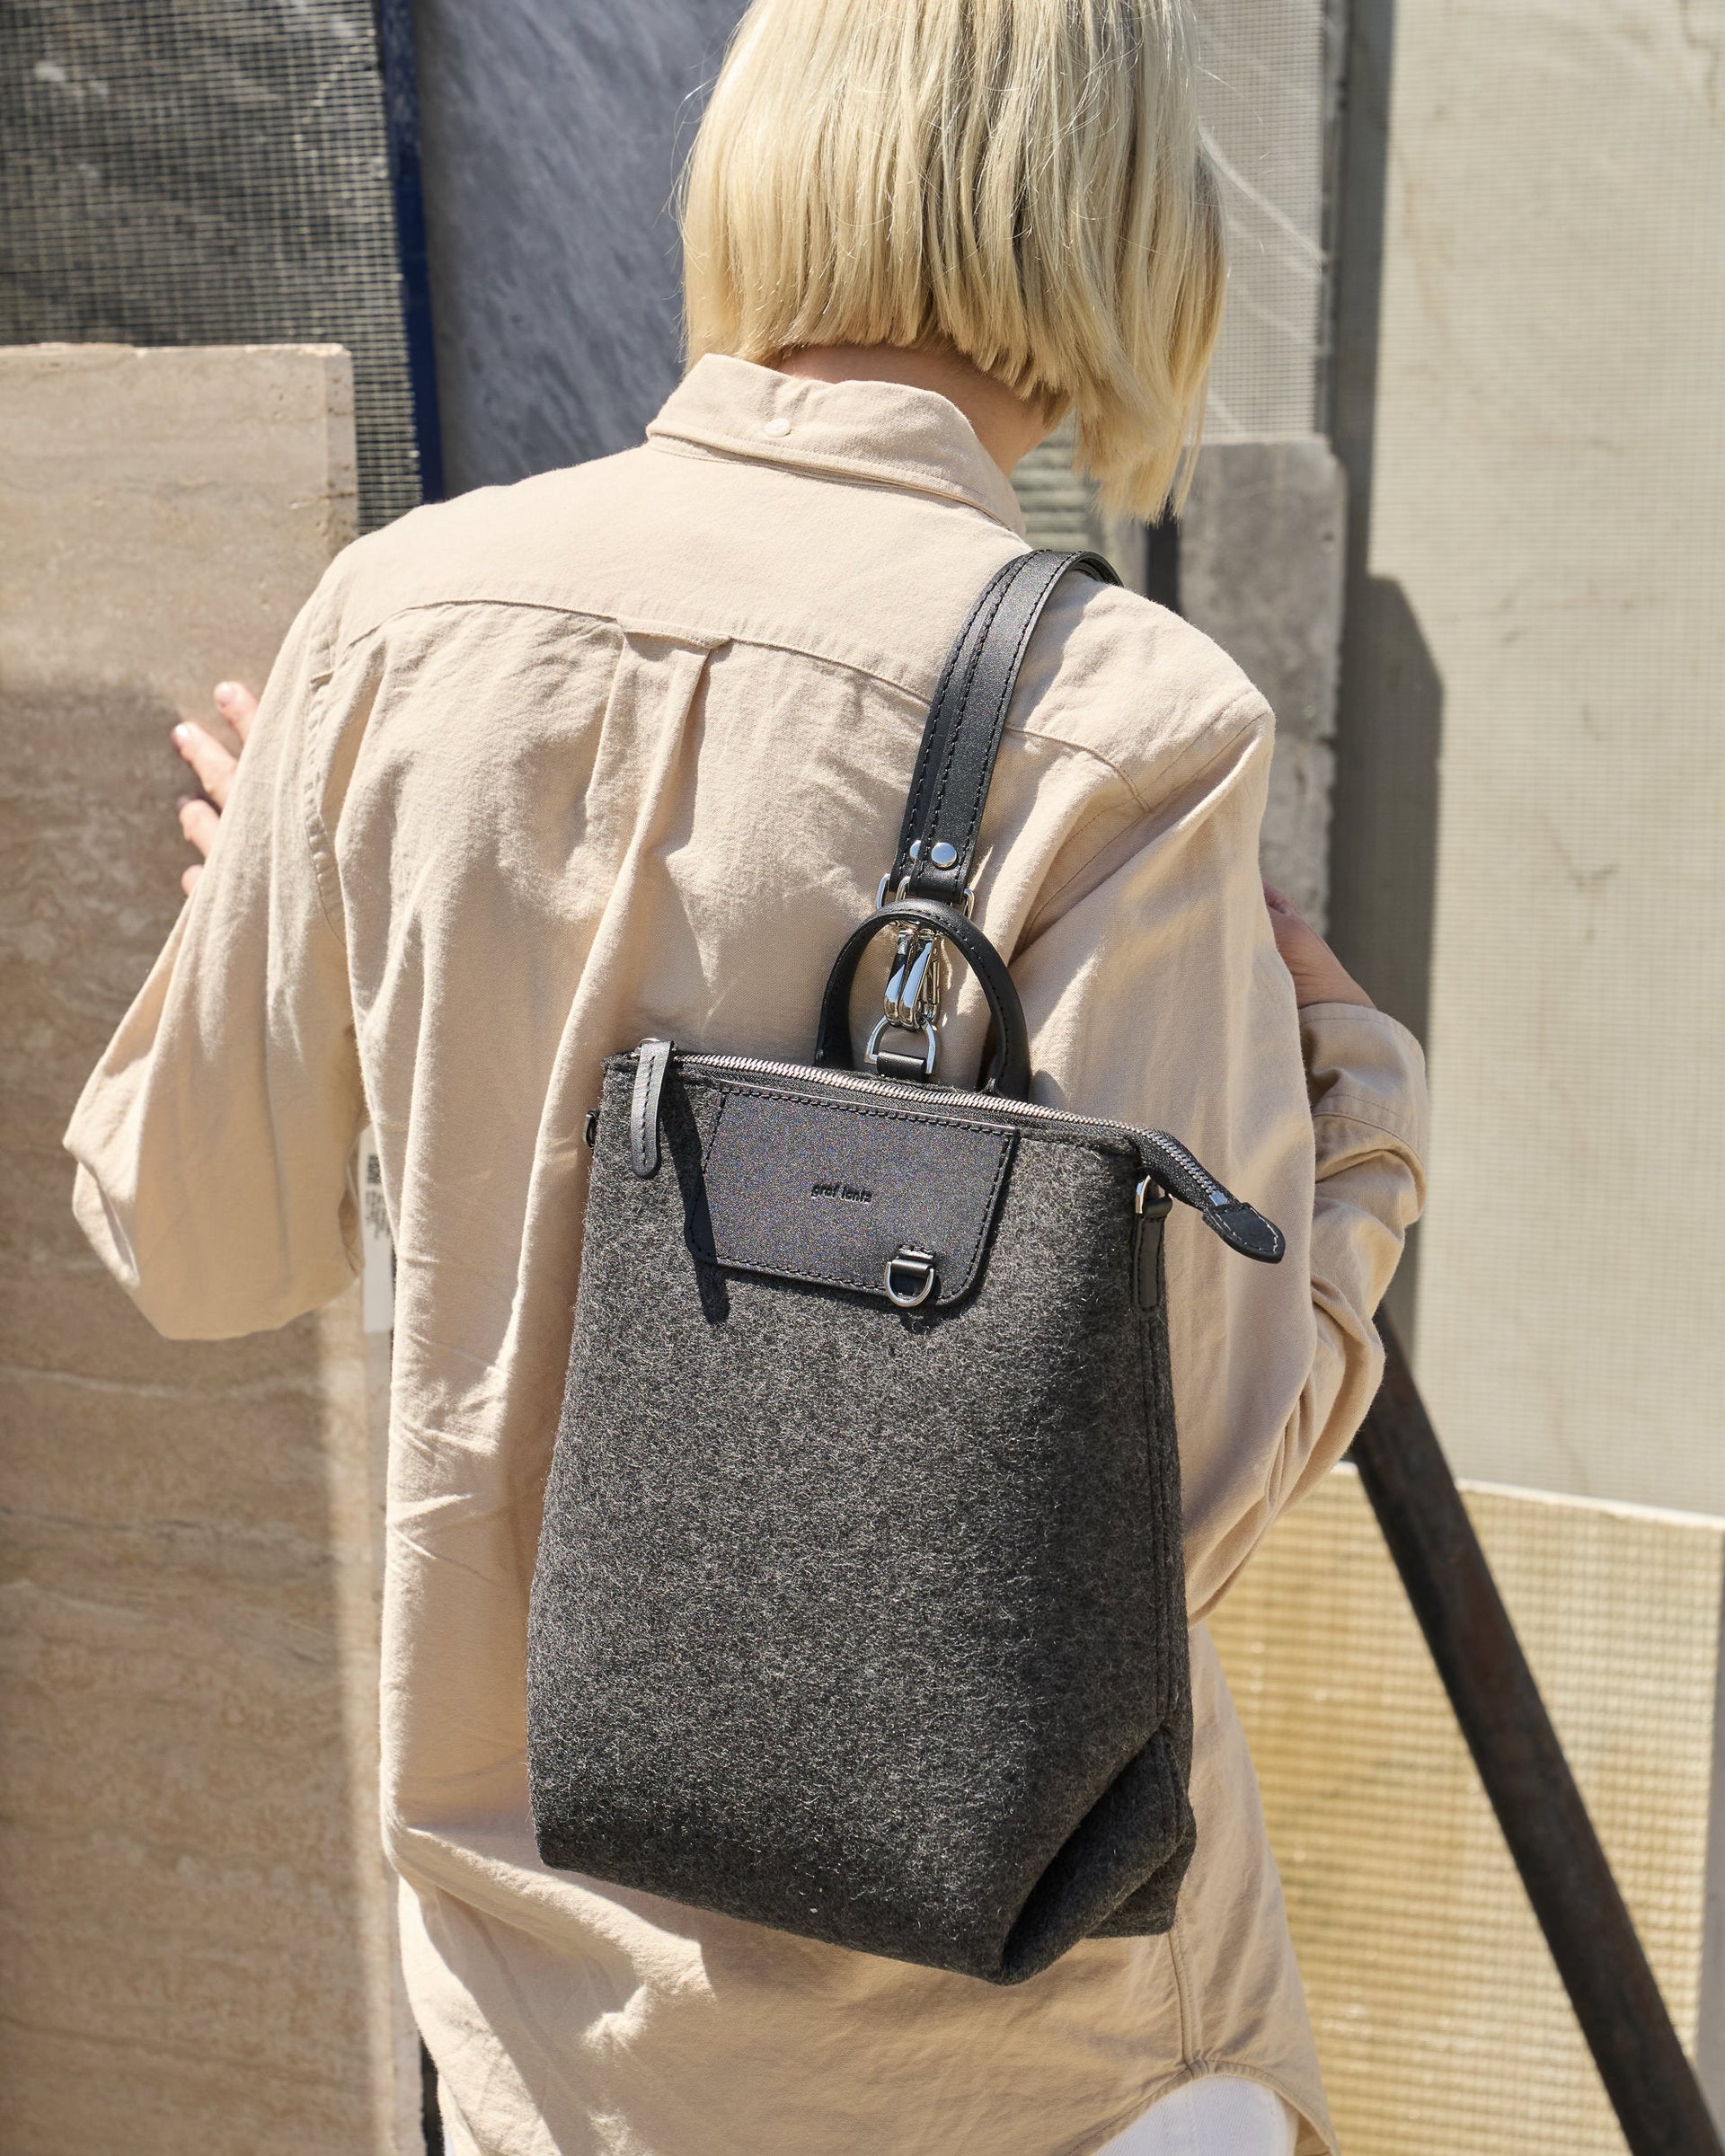 A Bedford Merino Wool Felt Midi Backpack carried by a woman over her shoulder, showcasing its dark grey and black colors